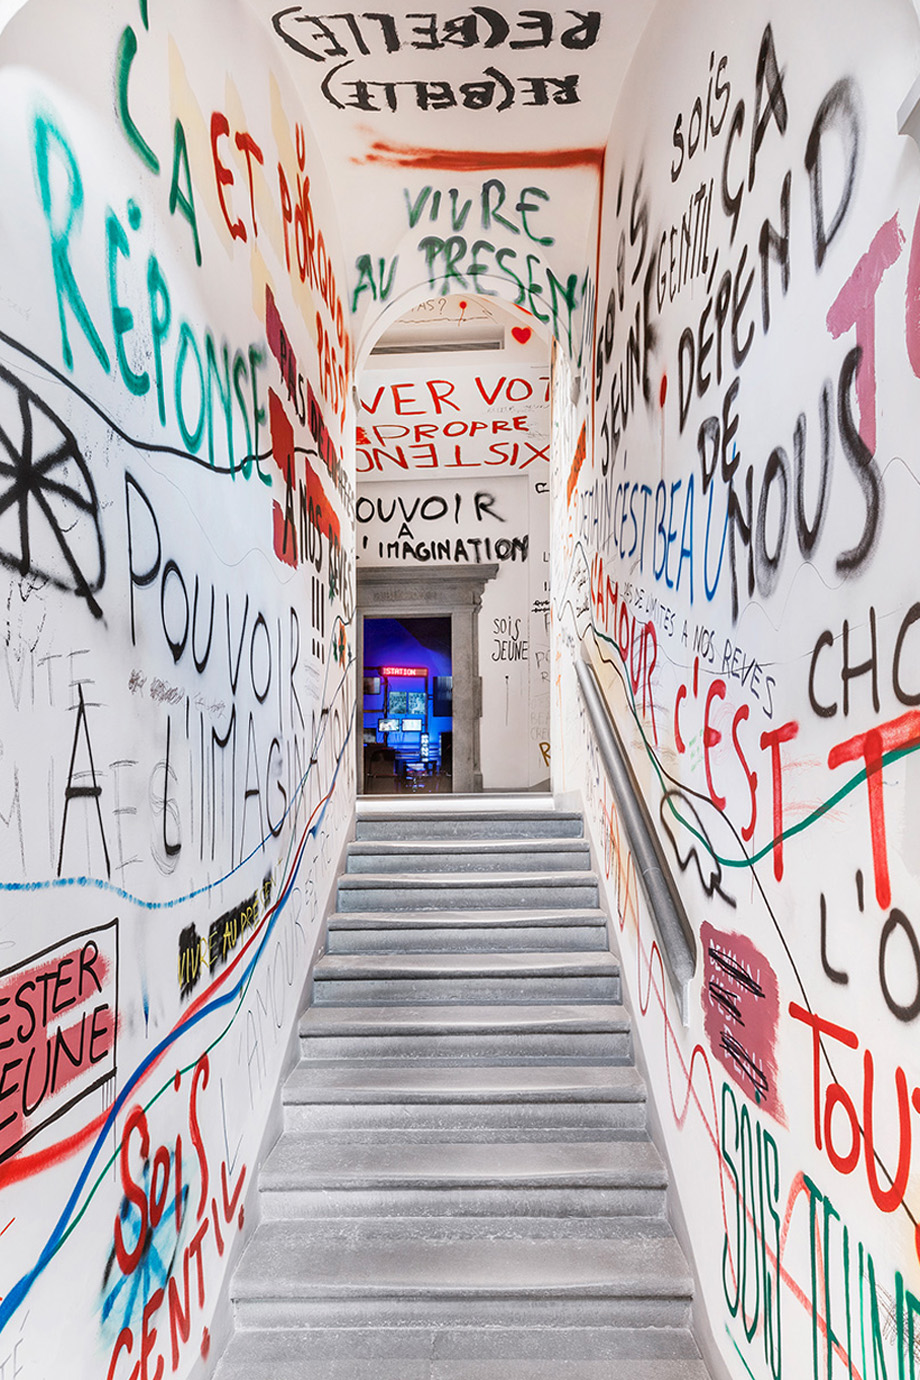 Gucci Garden museum in Florence, exhibition Archetypes, entrance of the museum with stairs and walls full of graffiti-art